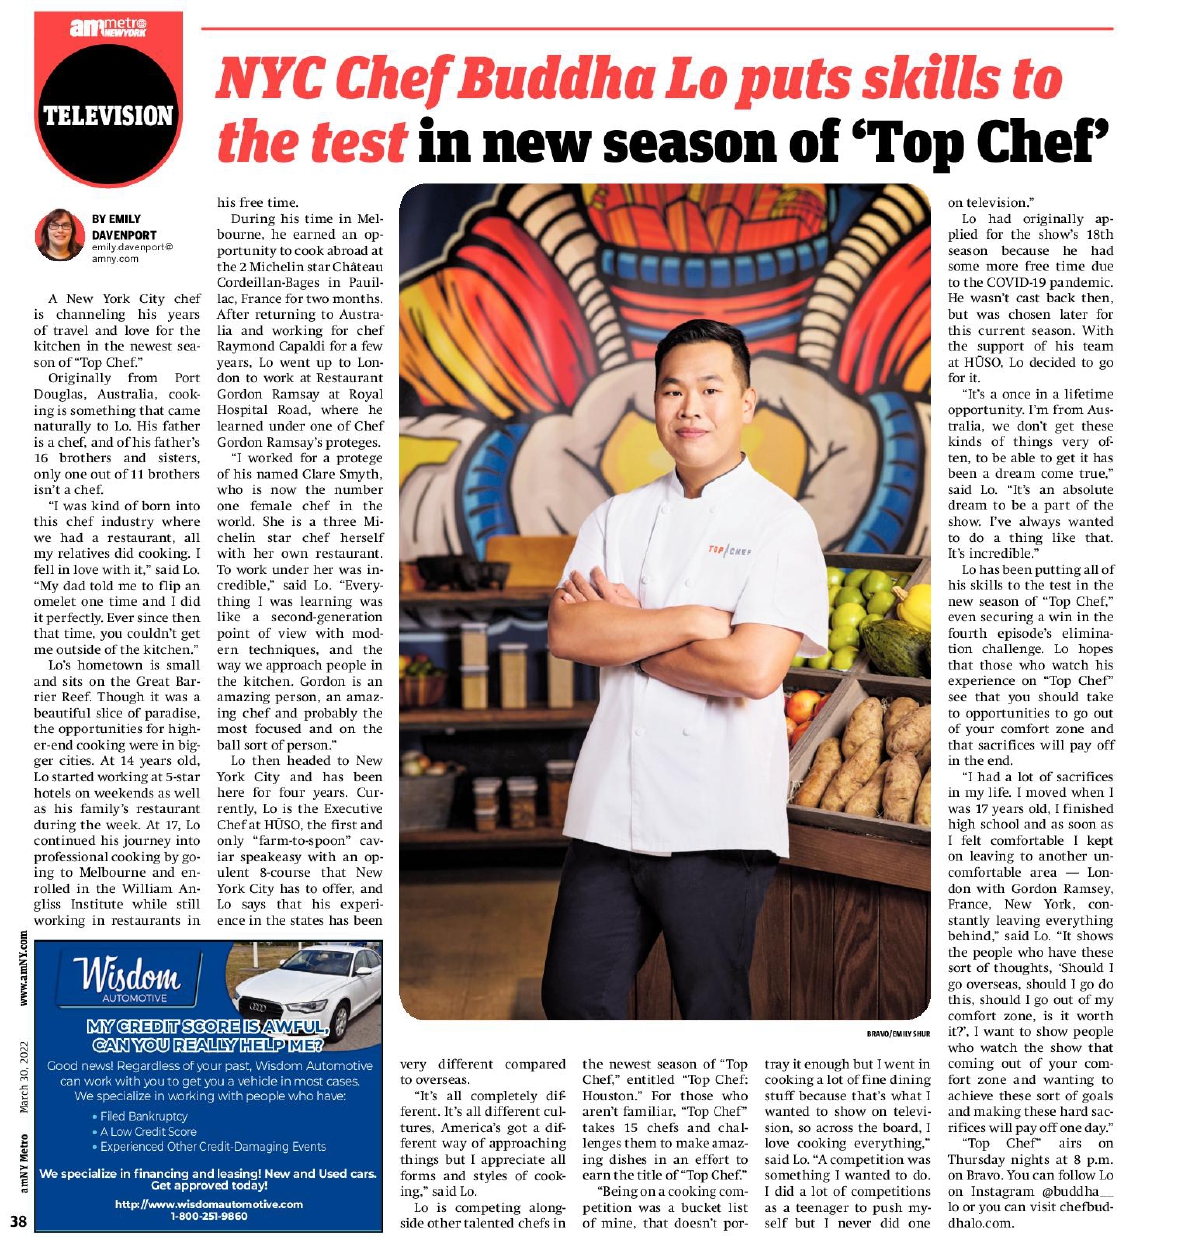 NYC Chef Buddha Lo put skills to the test in new season of 'Top Chef'